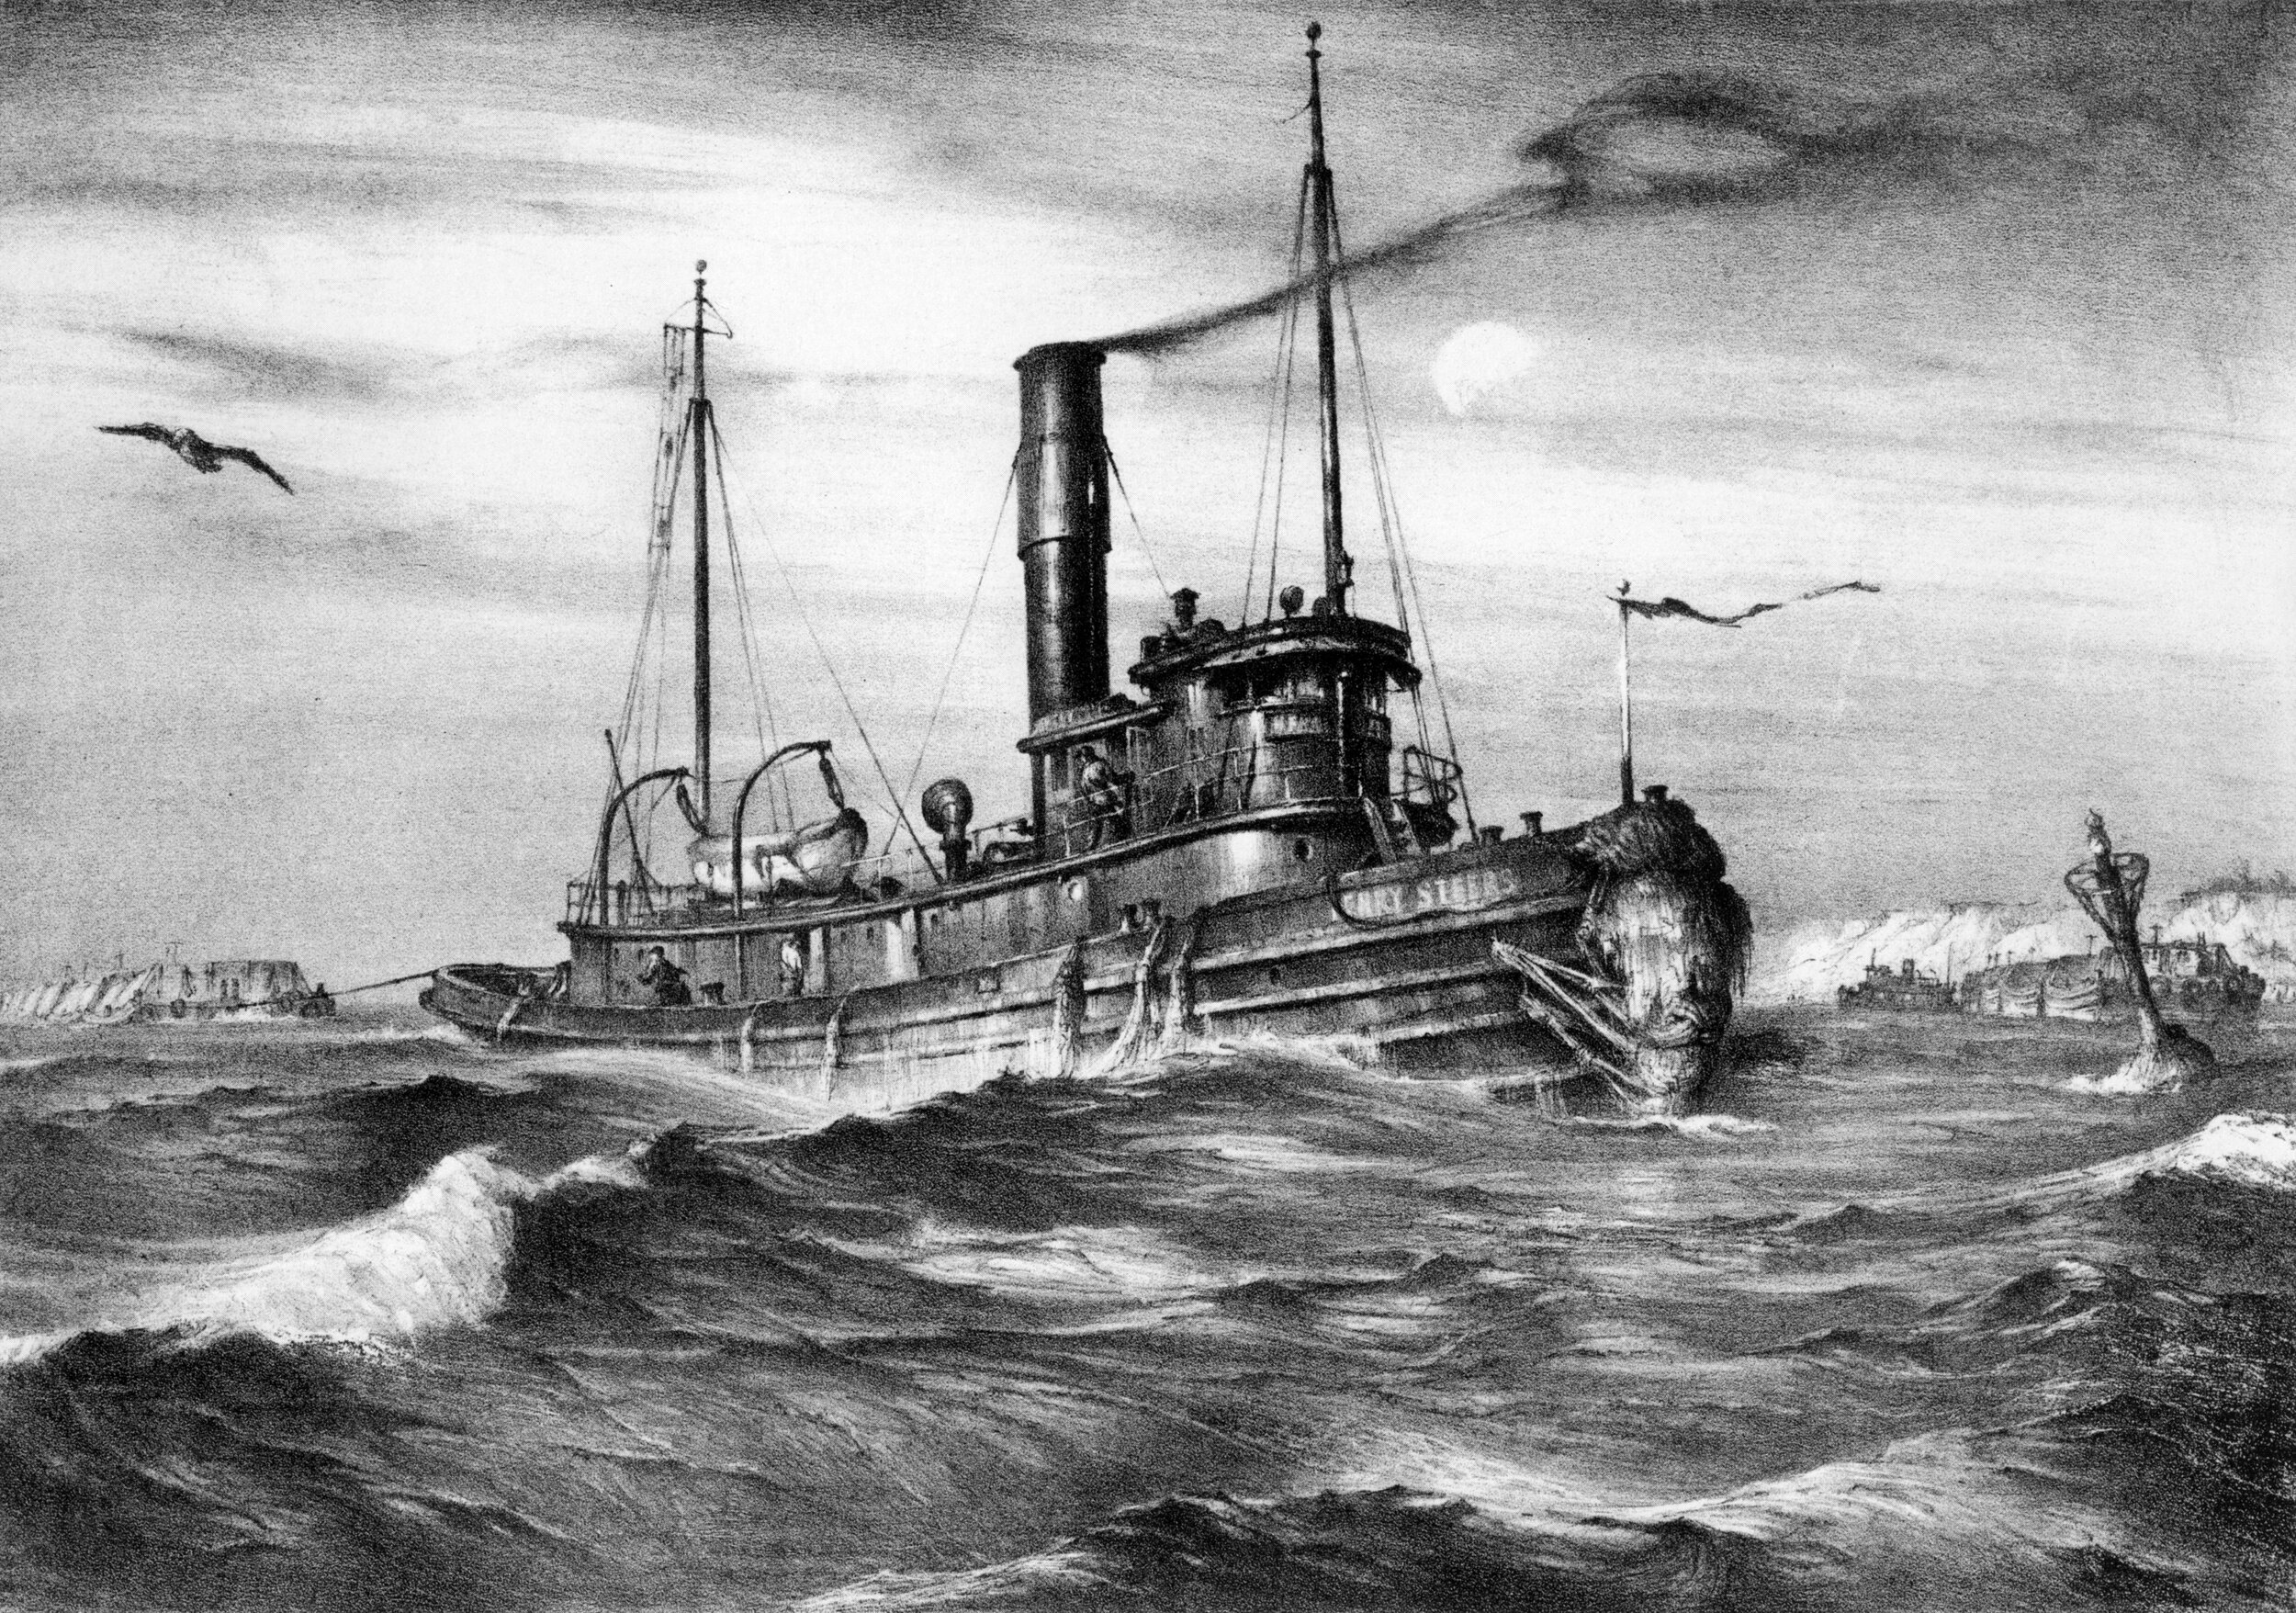  John A. Noble (1913-1983)   Sand Tow , Henry Steers  Lithograph, Edition 150, 1949, 11 ¼” x 16”   Gift of James M. Scott, in memory of Dr. Dennis J. Donovan   